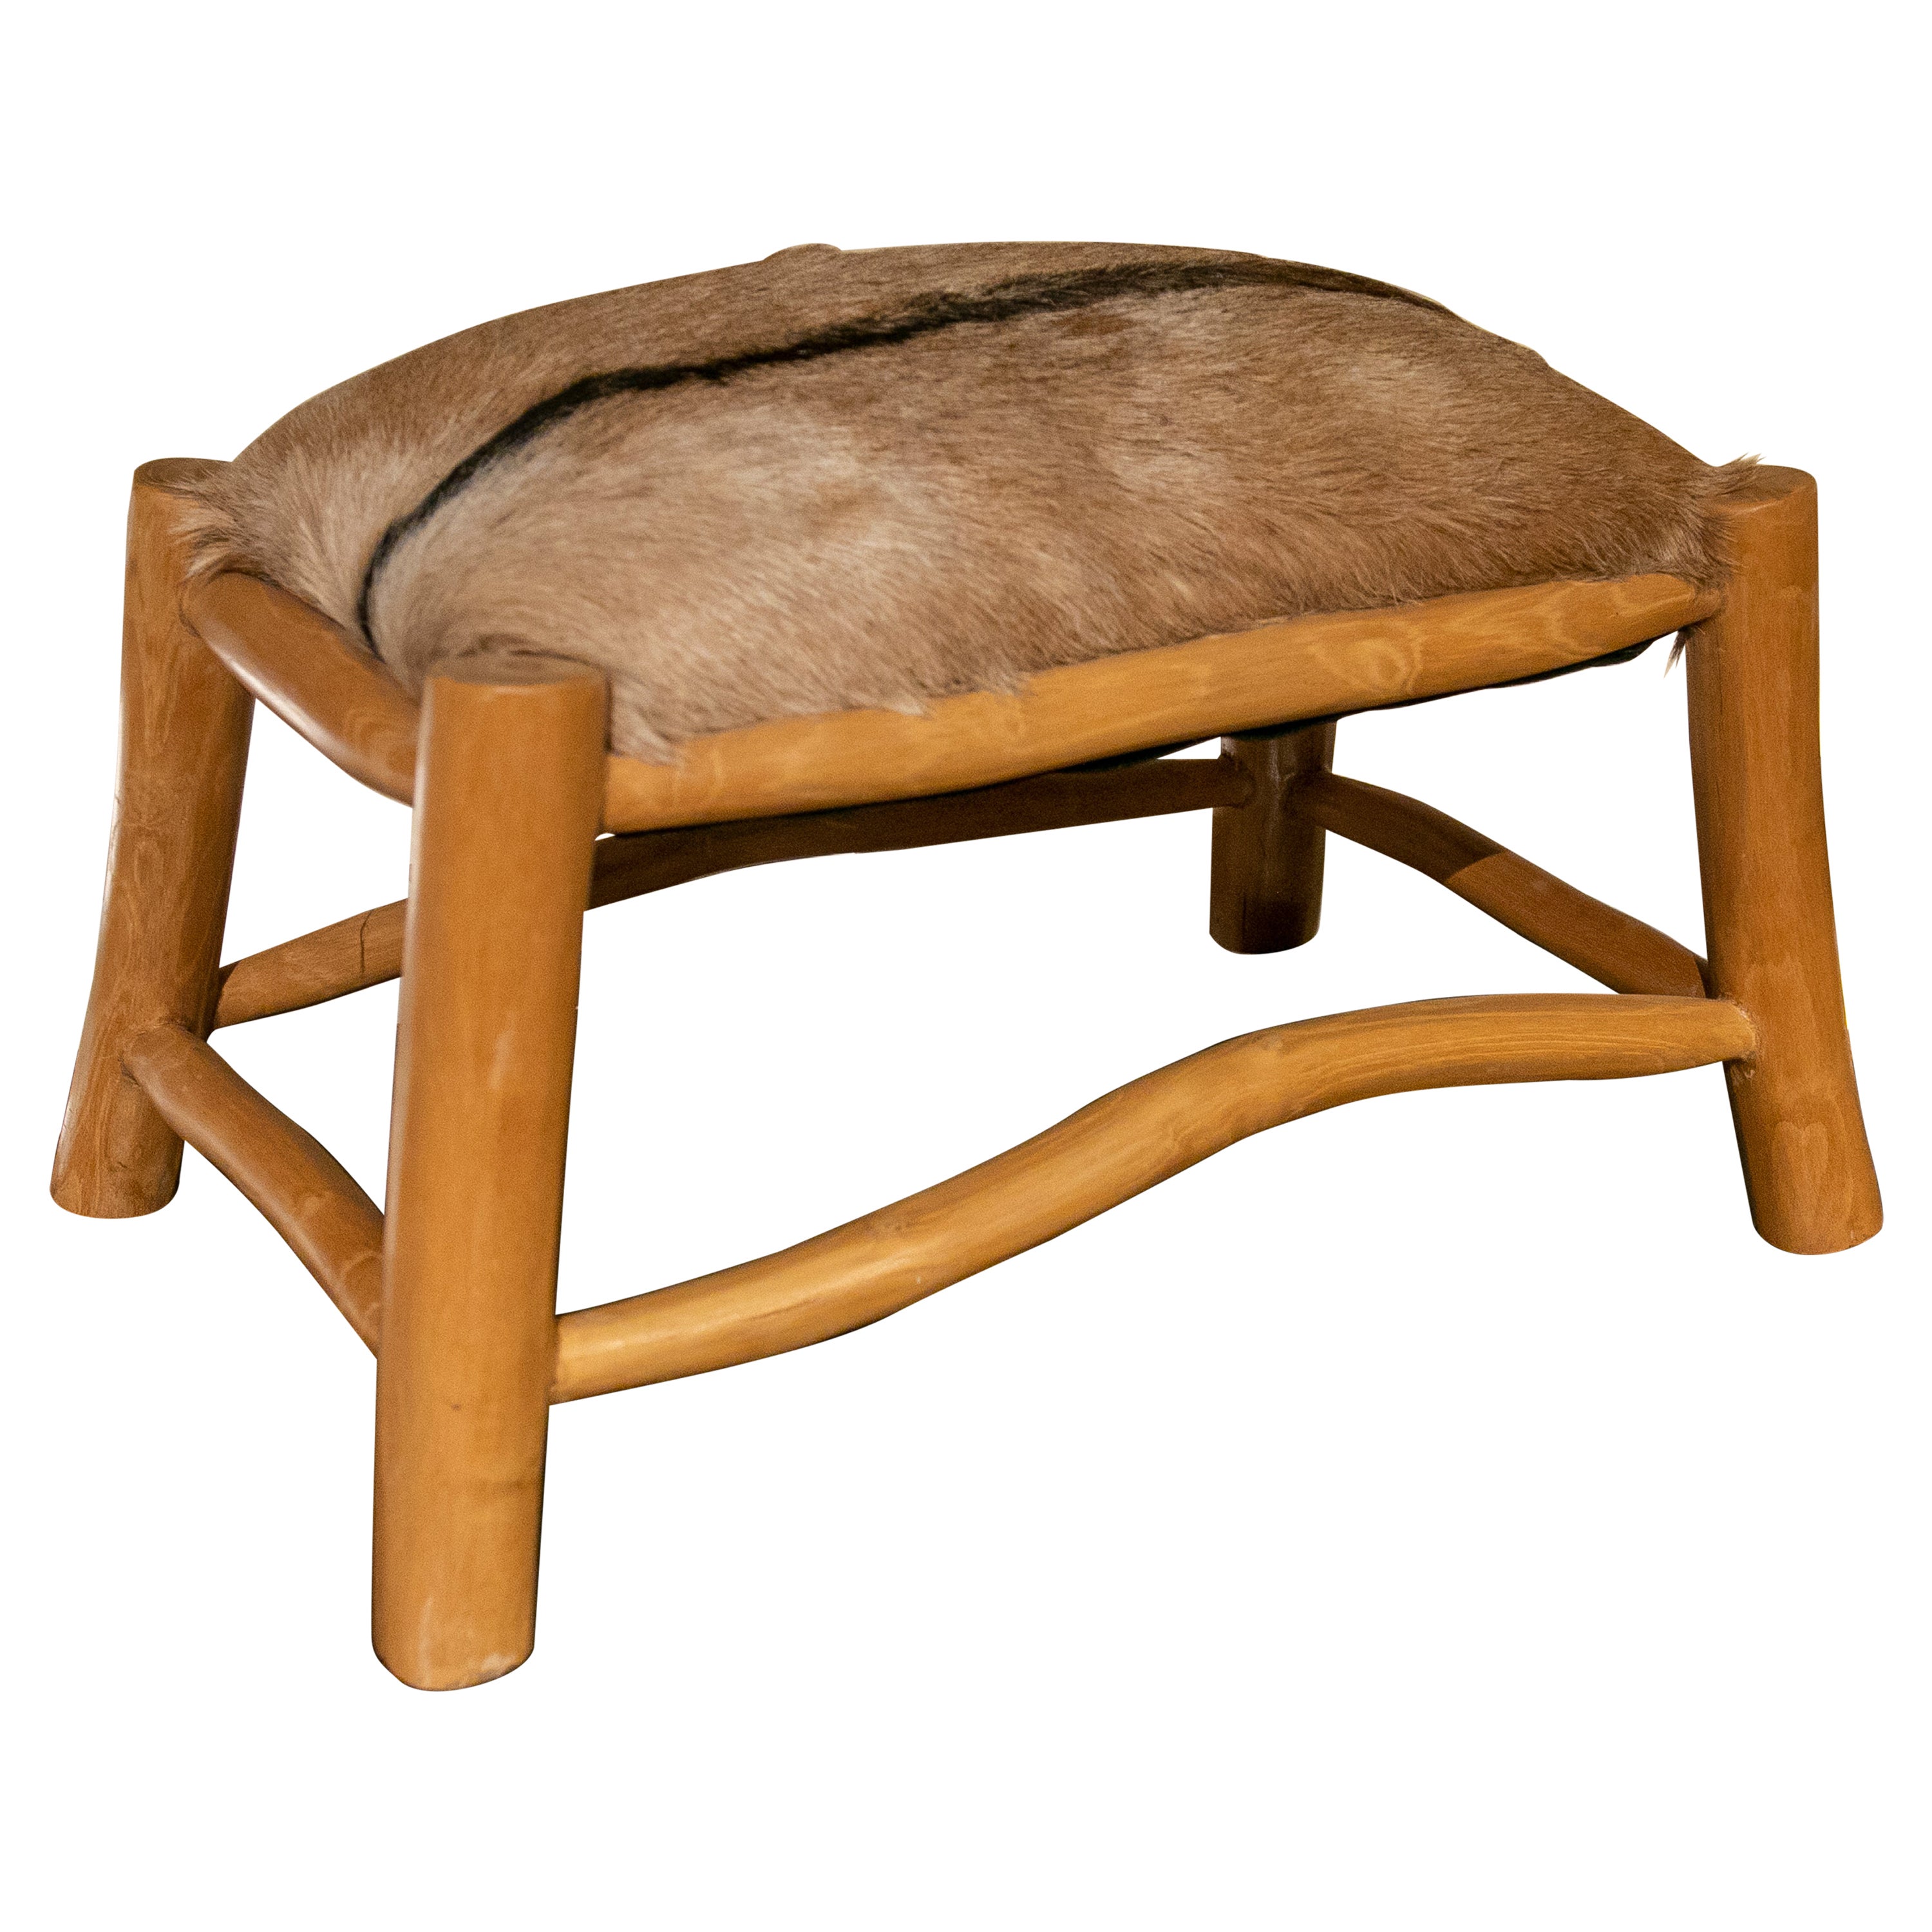 German Wooden Stool with a Fallow Deer Leather Seat